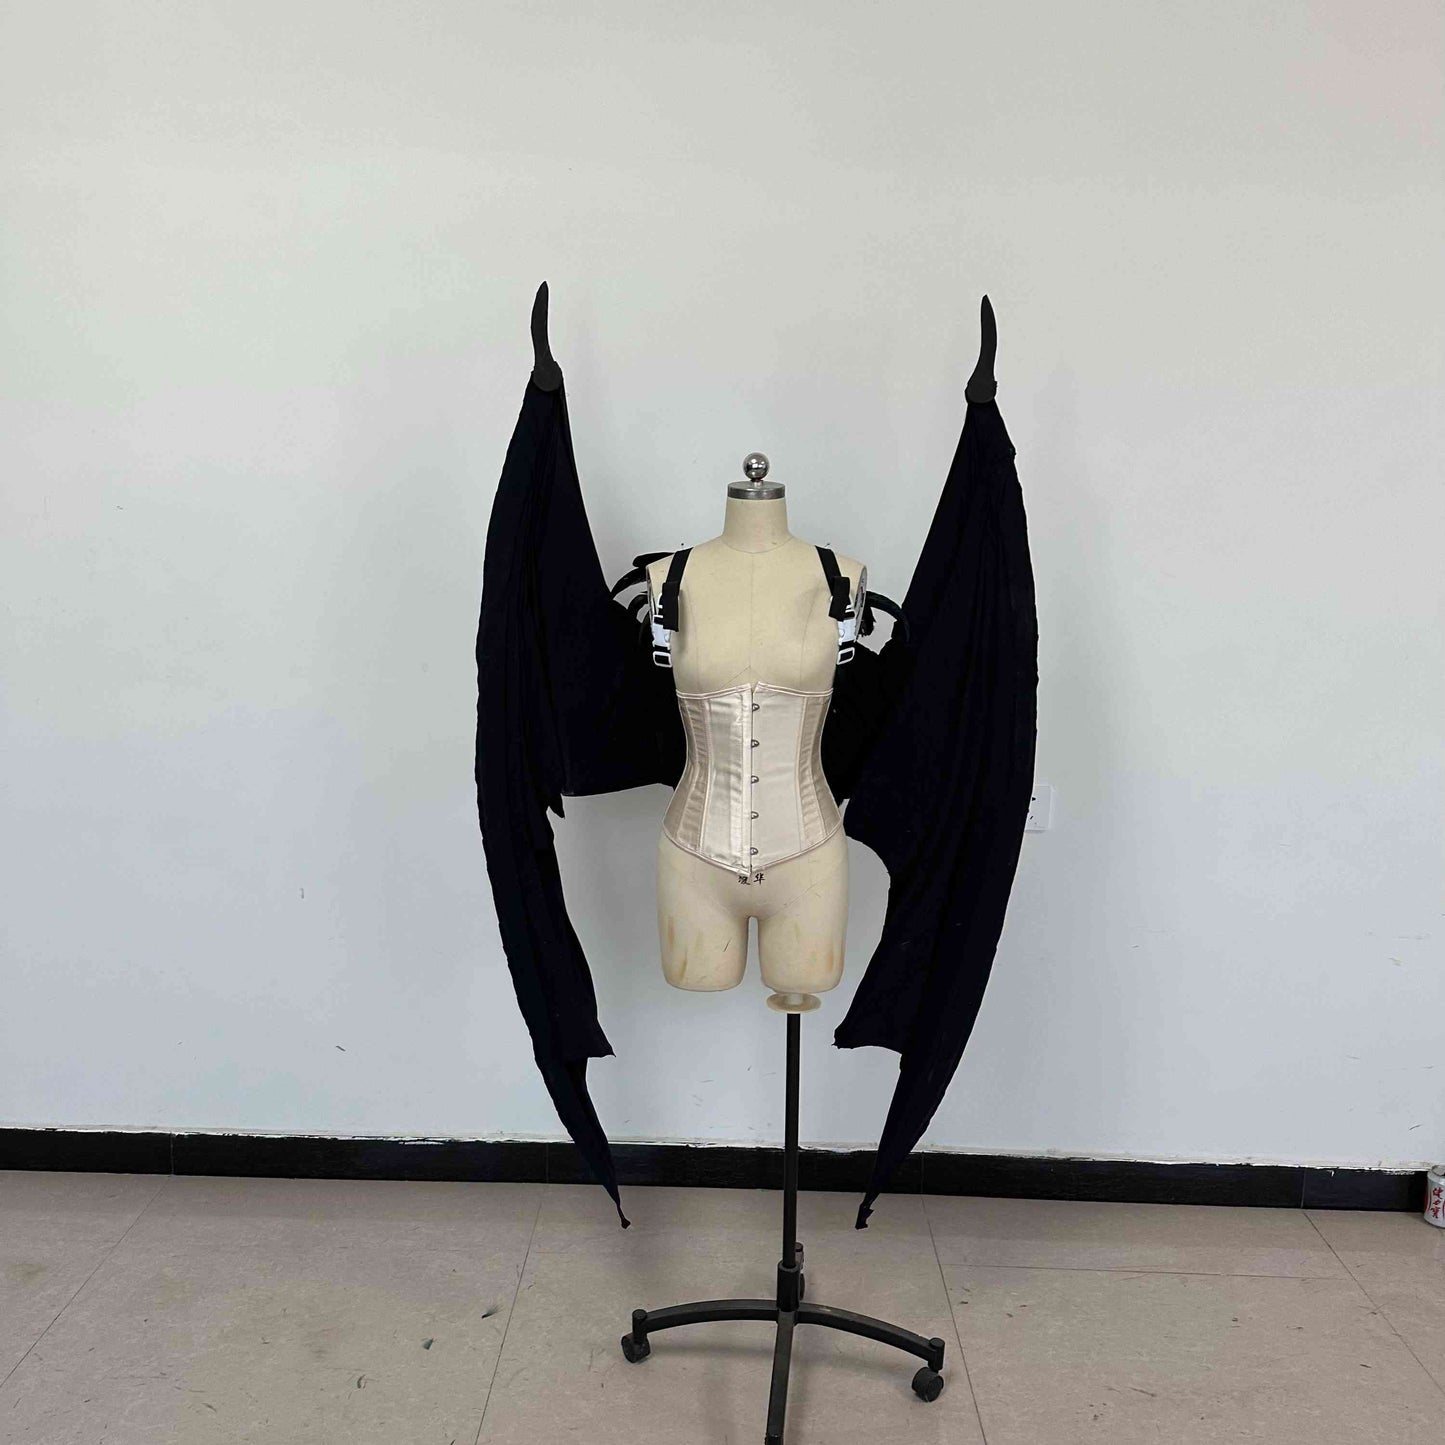 Our large black color devil wings folded from the front. Wings are moveable and can control extension and folding remotely. Made from aluminum alloy and cloth. Wings for fallen angel costume or devil costume. Suitable for fantasy photoshoots or events.